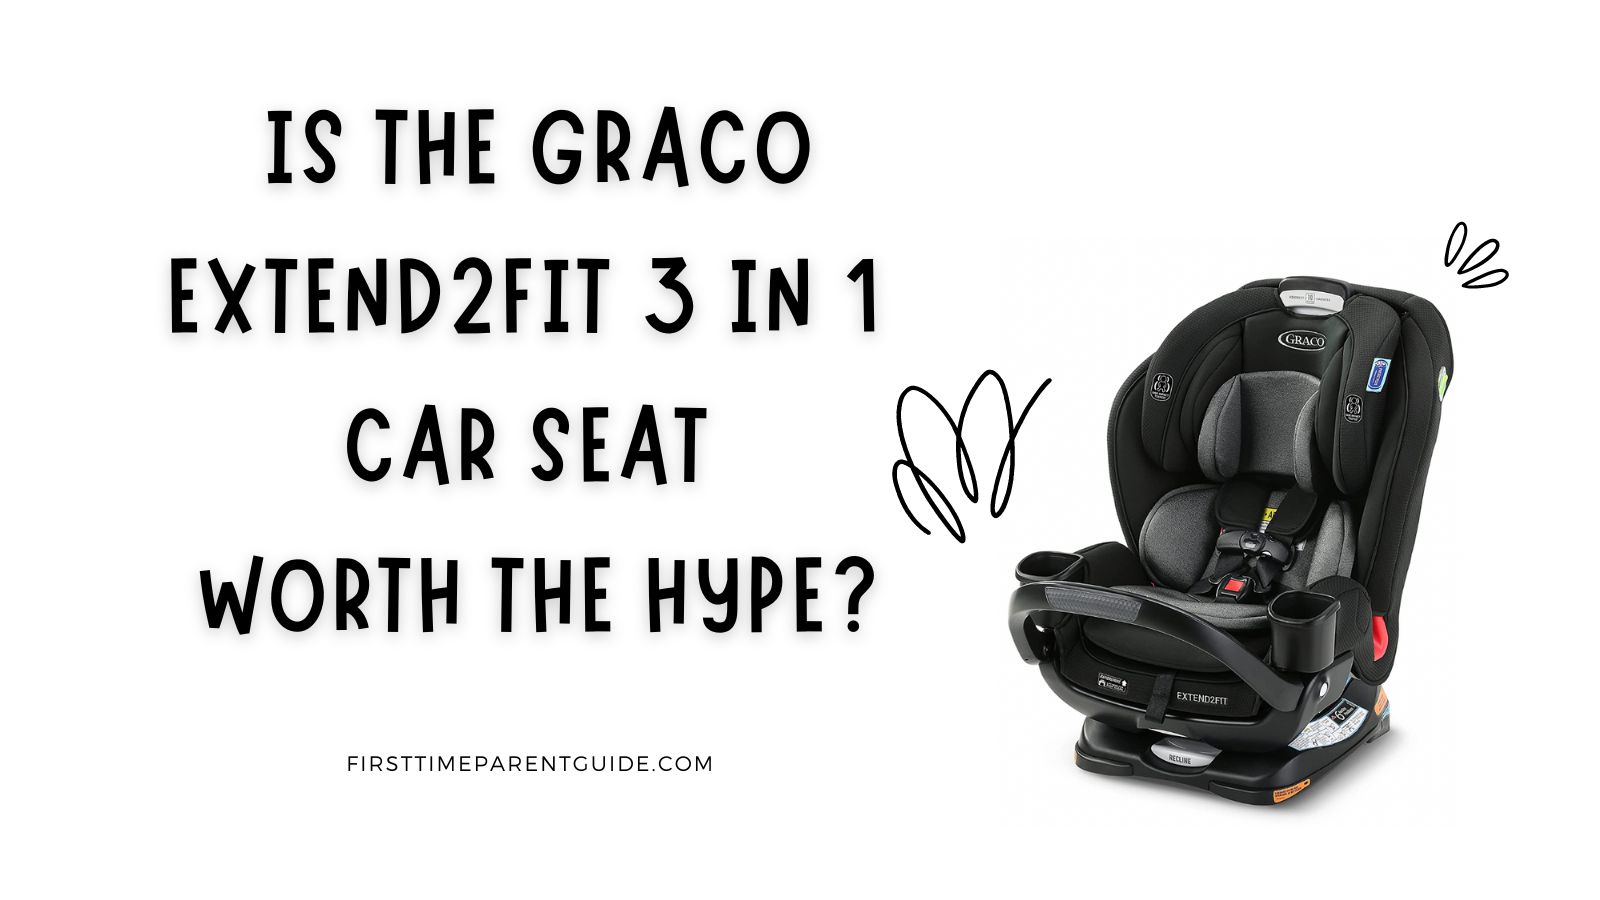 Graco Extend2fit 3 in 1